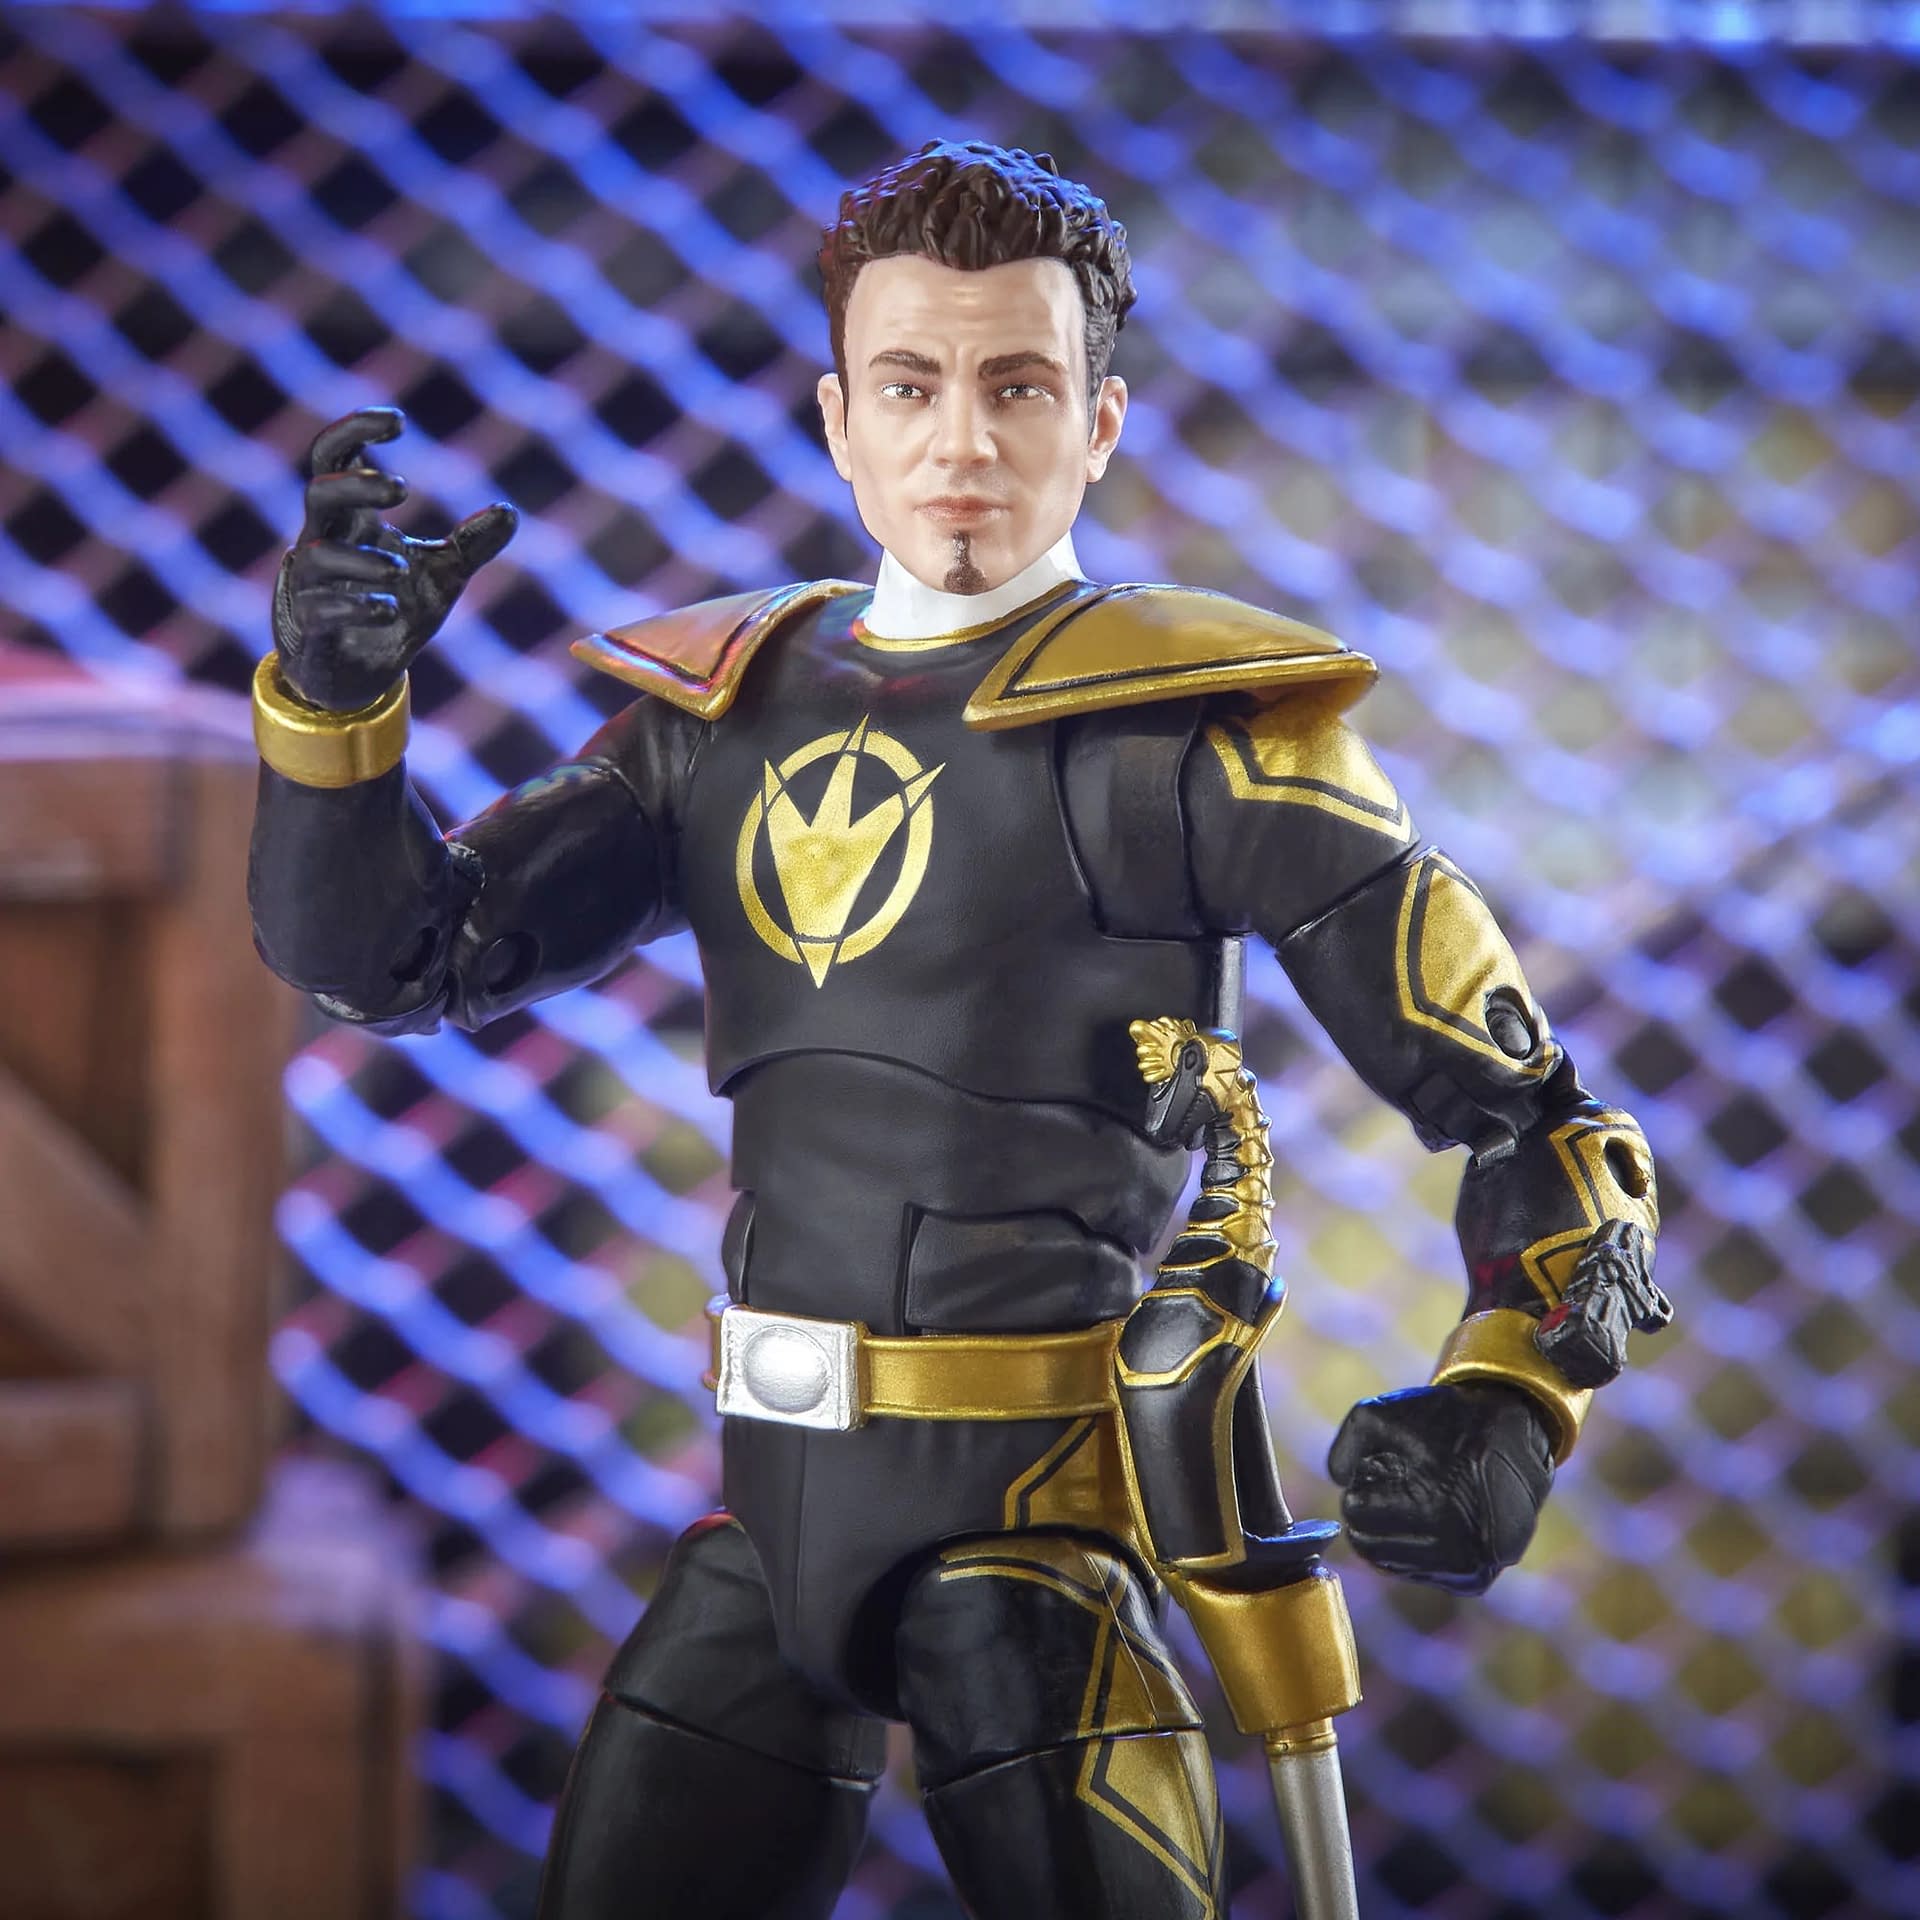 Tommy Oliver Returns as the Dino Thunder Black Ranger with Hasbro